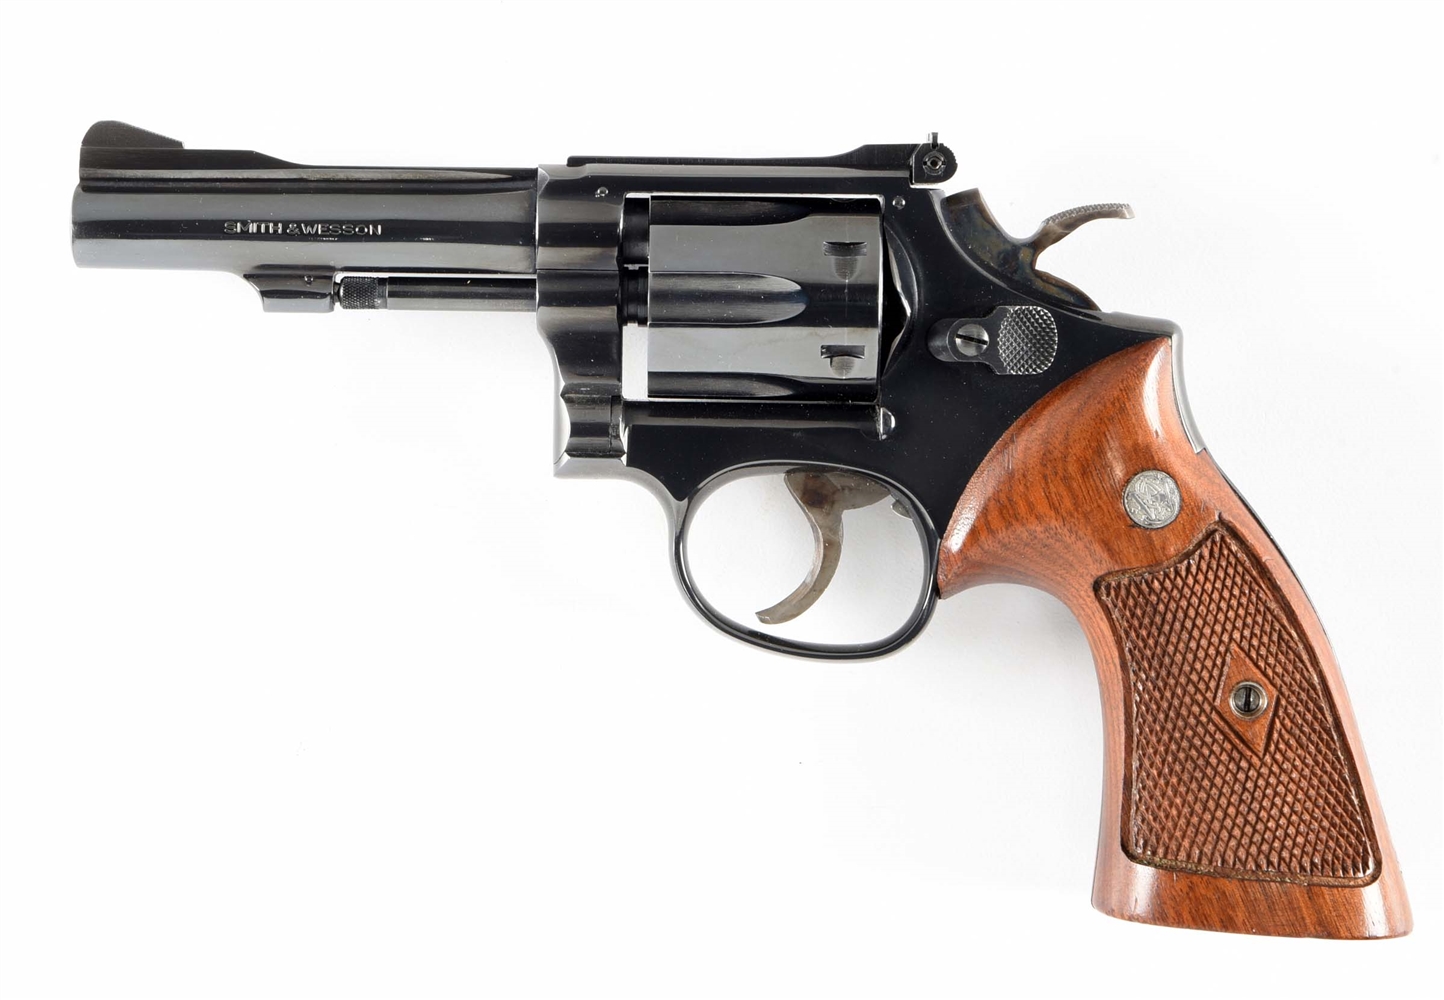 (M) SMITH & WESSON MODEL 18-4 K-22 COMBAT MASTERPIECE DOUBLE ACTION REVOLVER.